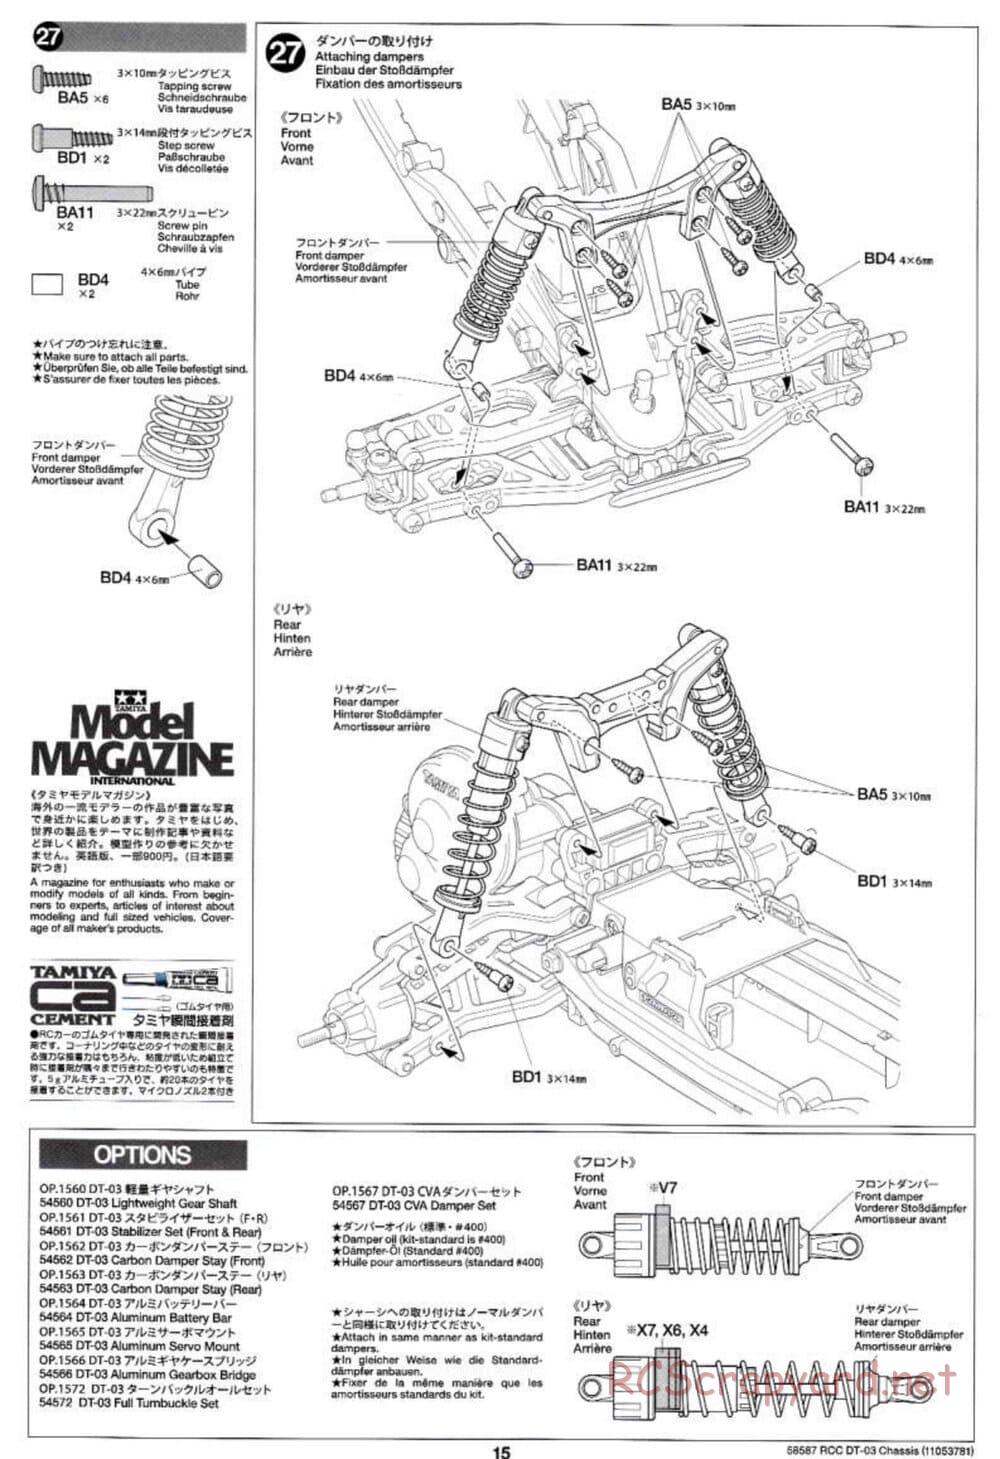 Tamiya - Neo Fighter Buggy Chassis - Manual - Page 15